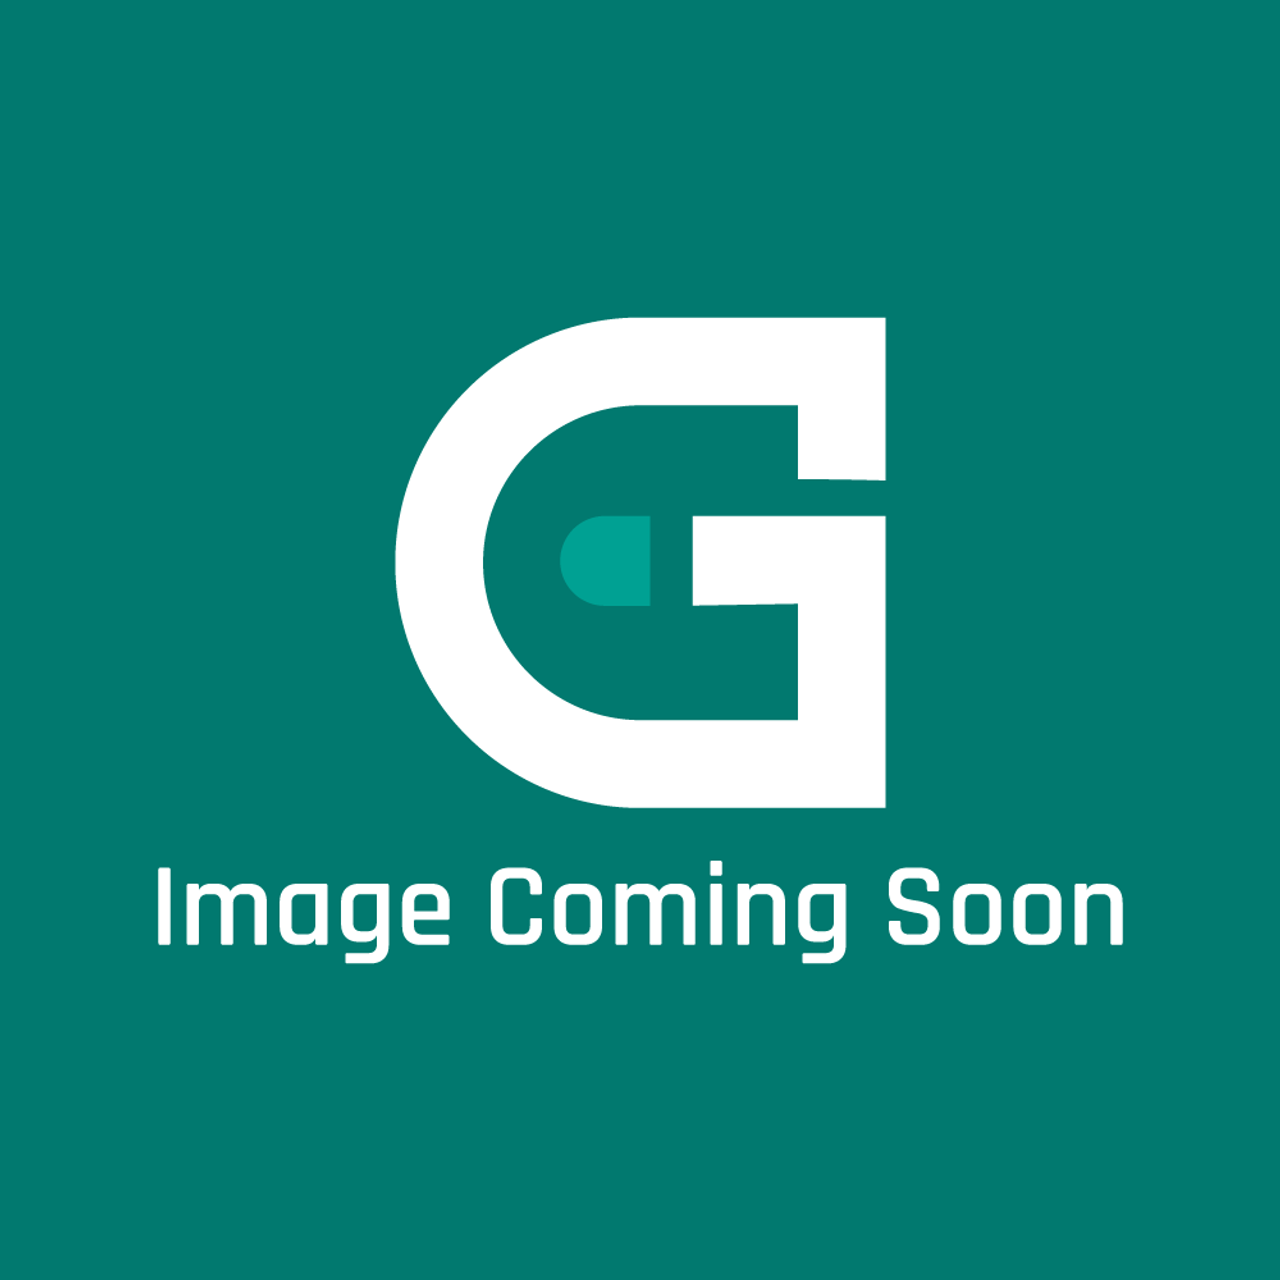 AGA SAG-033617-0766 - Rh Outer Door Panel - Blk - Image Coming Soon!